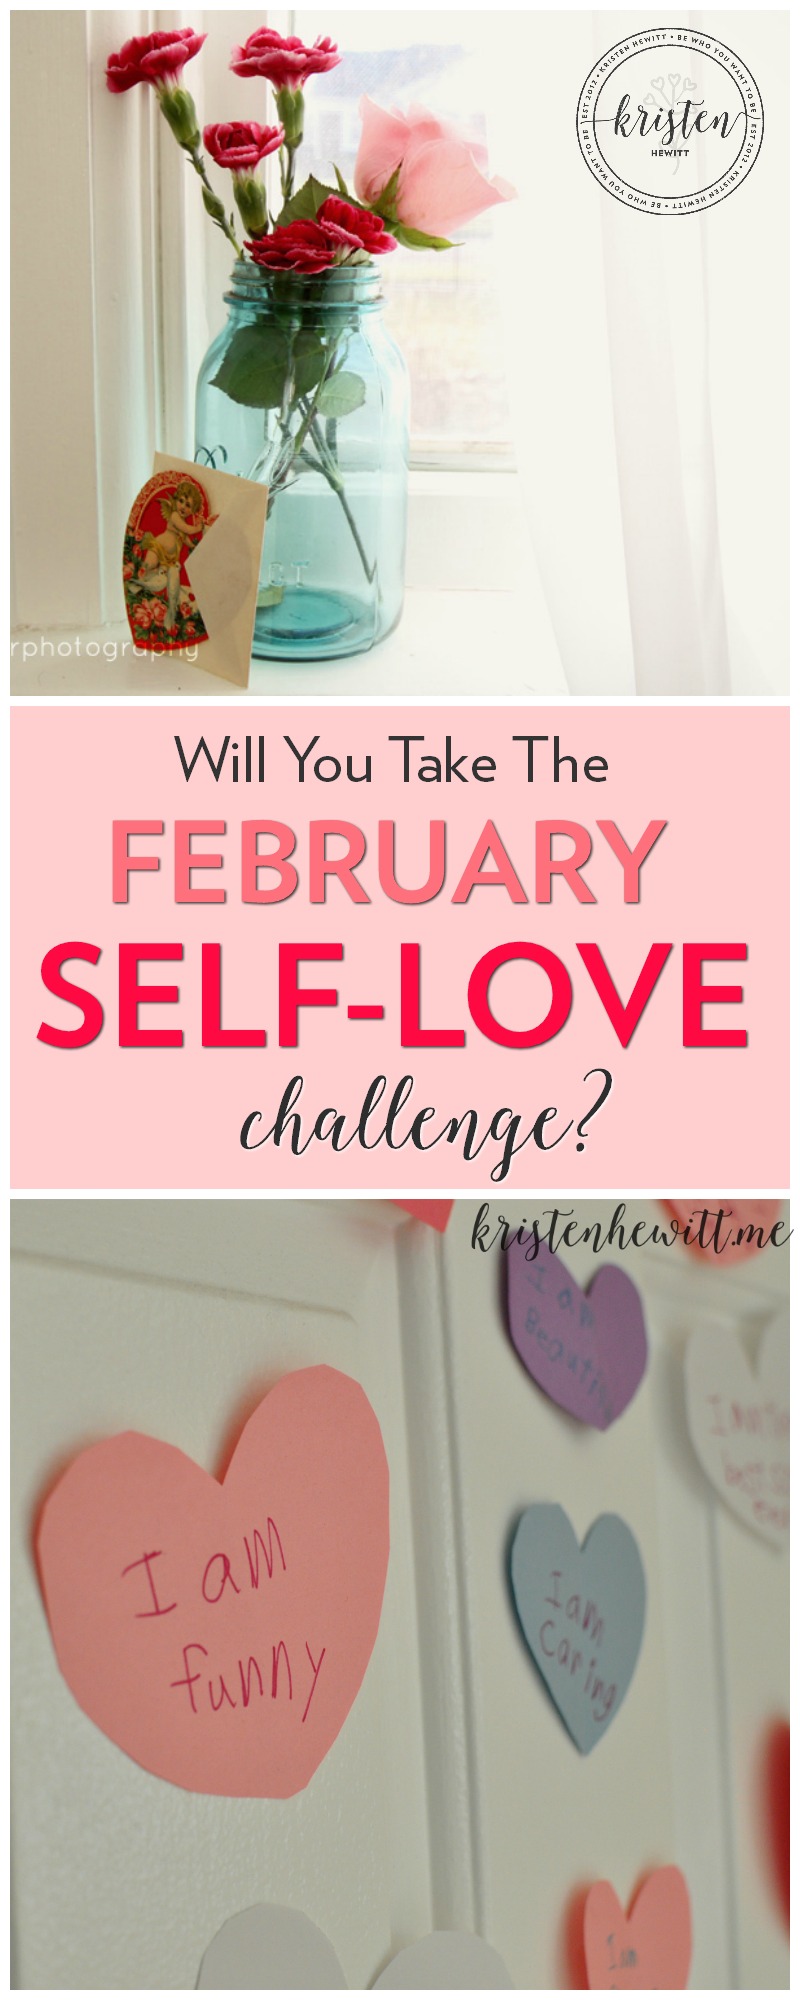 Do you want to inspire self-love into your kids and maybe yourself as well? Take the February self-love challenge and inspire yourself and your family. 